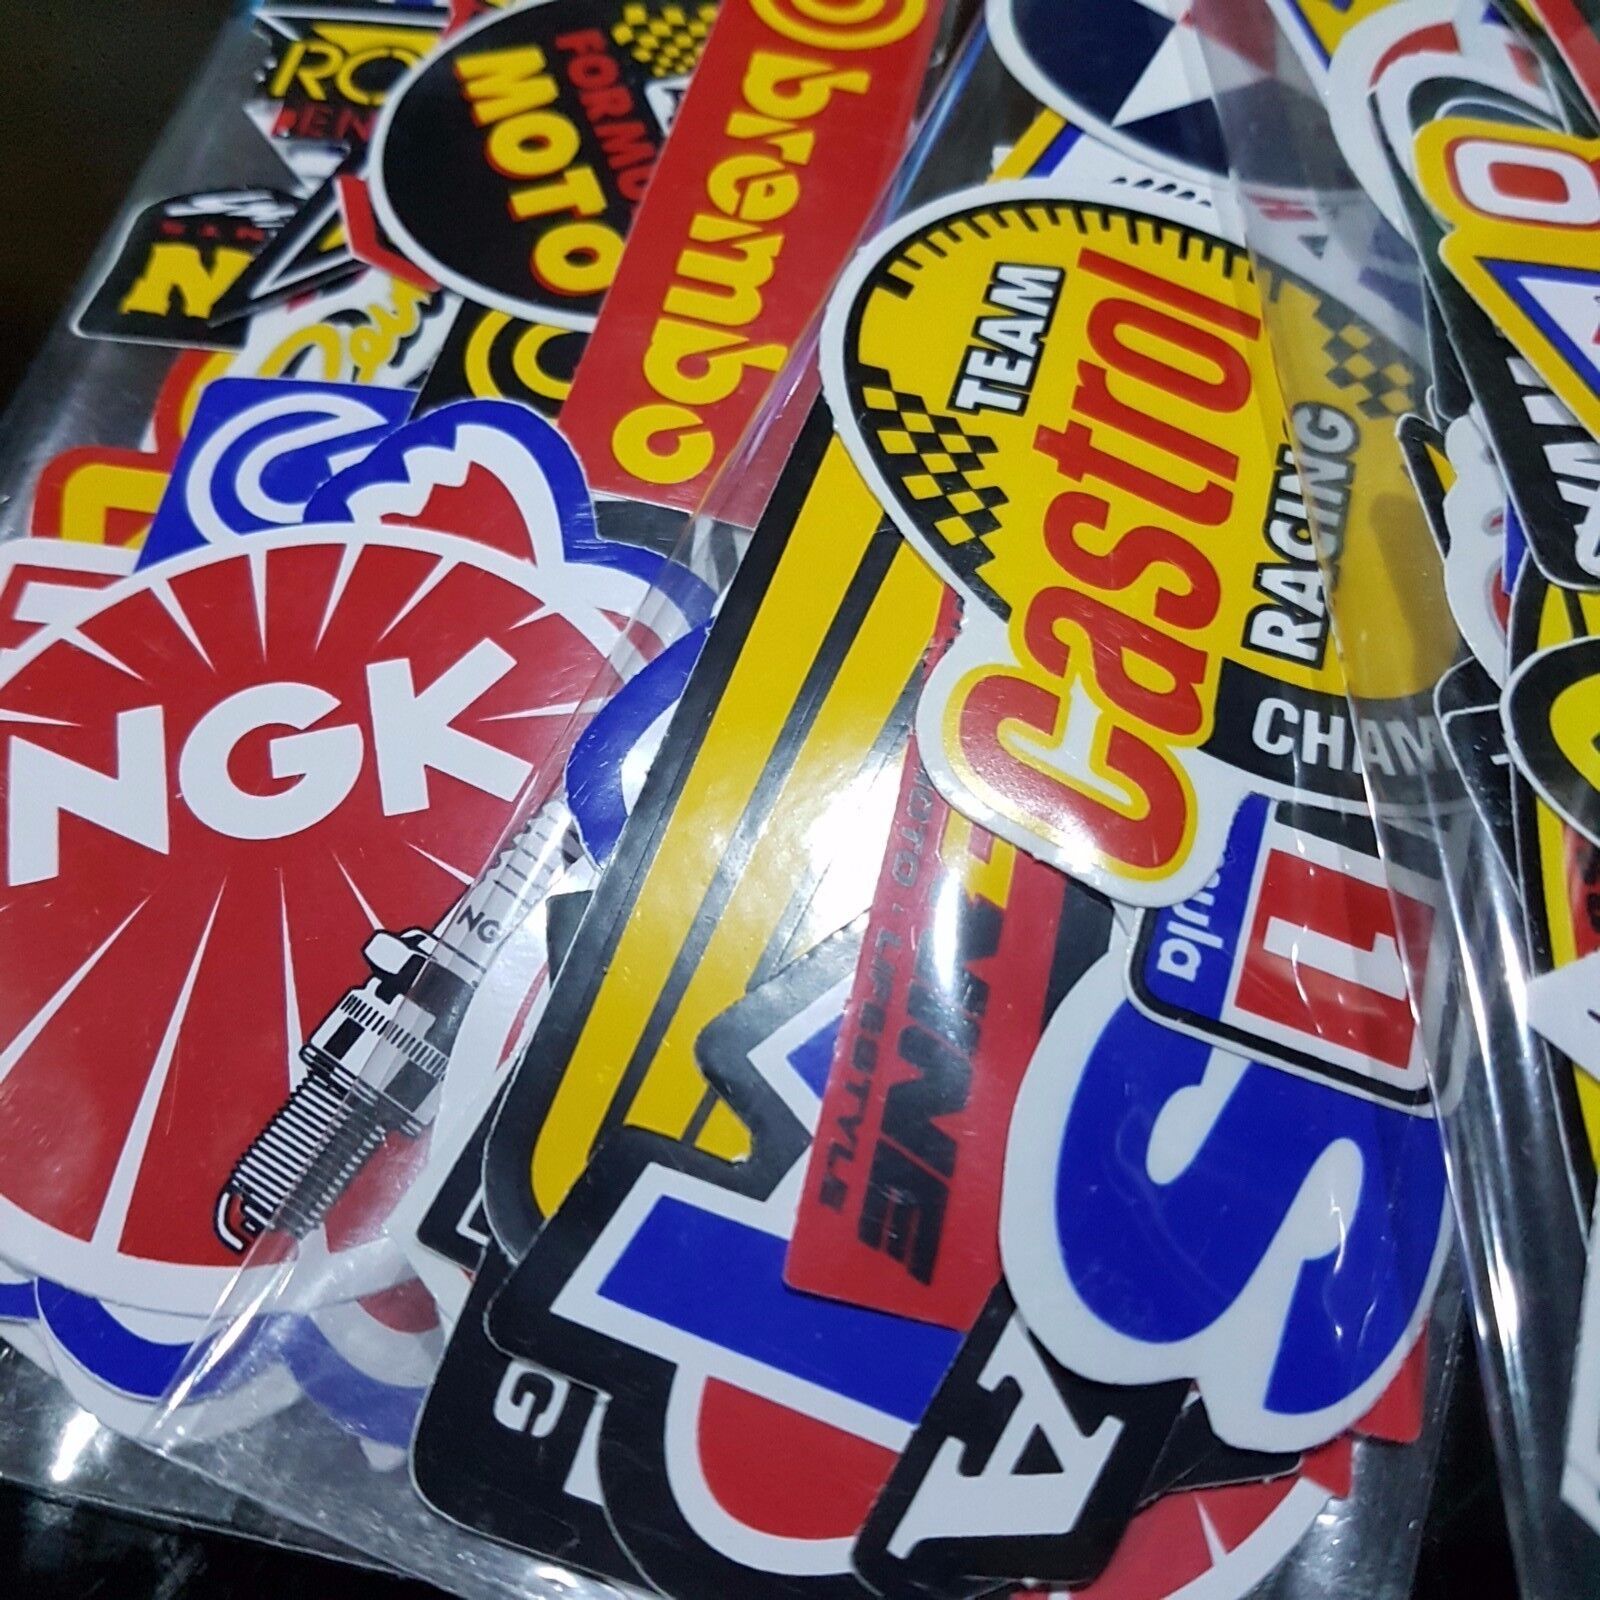 100 Pcs Racing Stickers Decals Motocross Motorcycles Car Vintage Sticker Lot